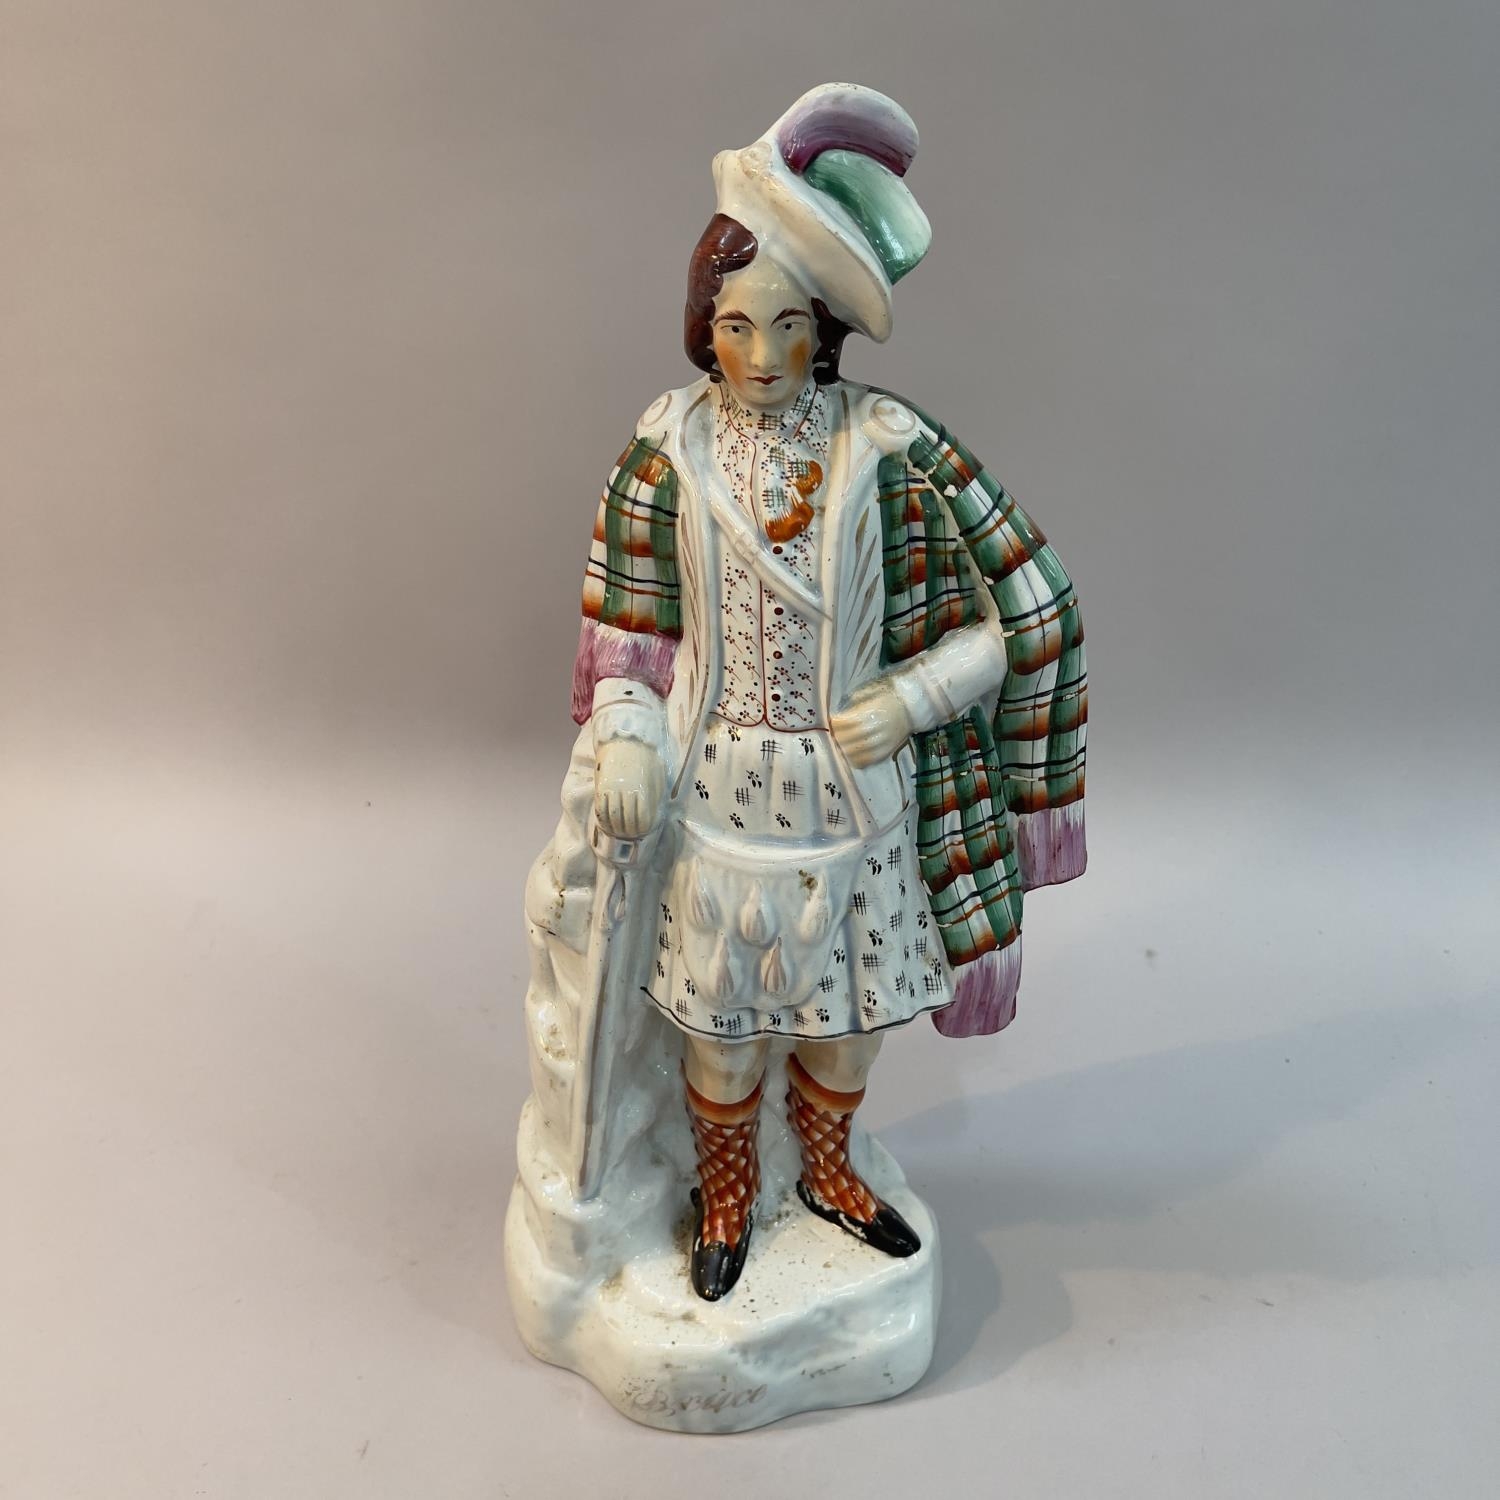 A mid 19th century Staffordshire pottery figure of Robert The Bruce standing wearing a feathered